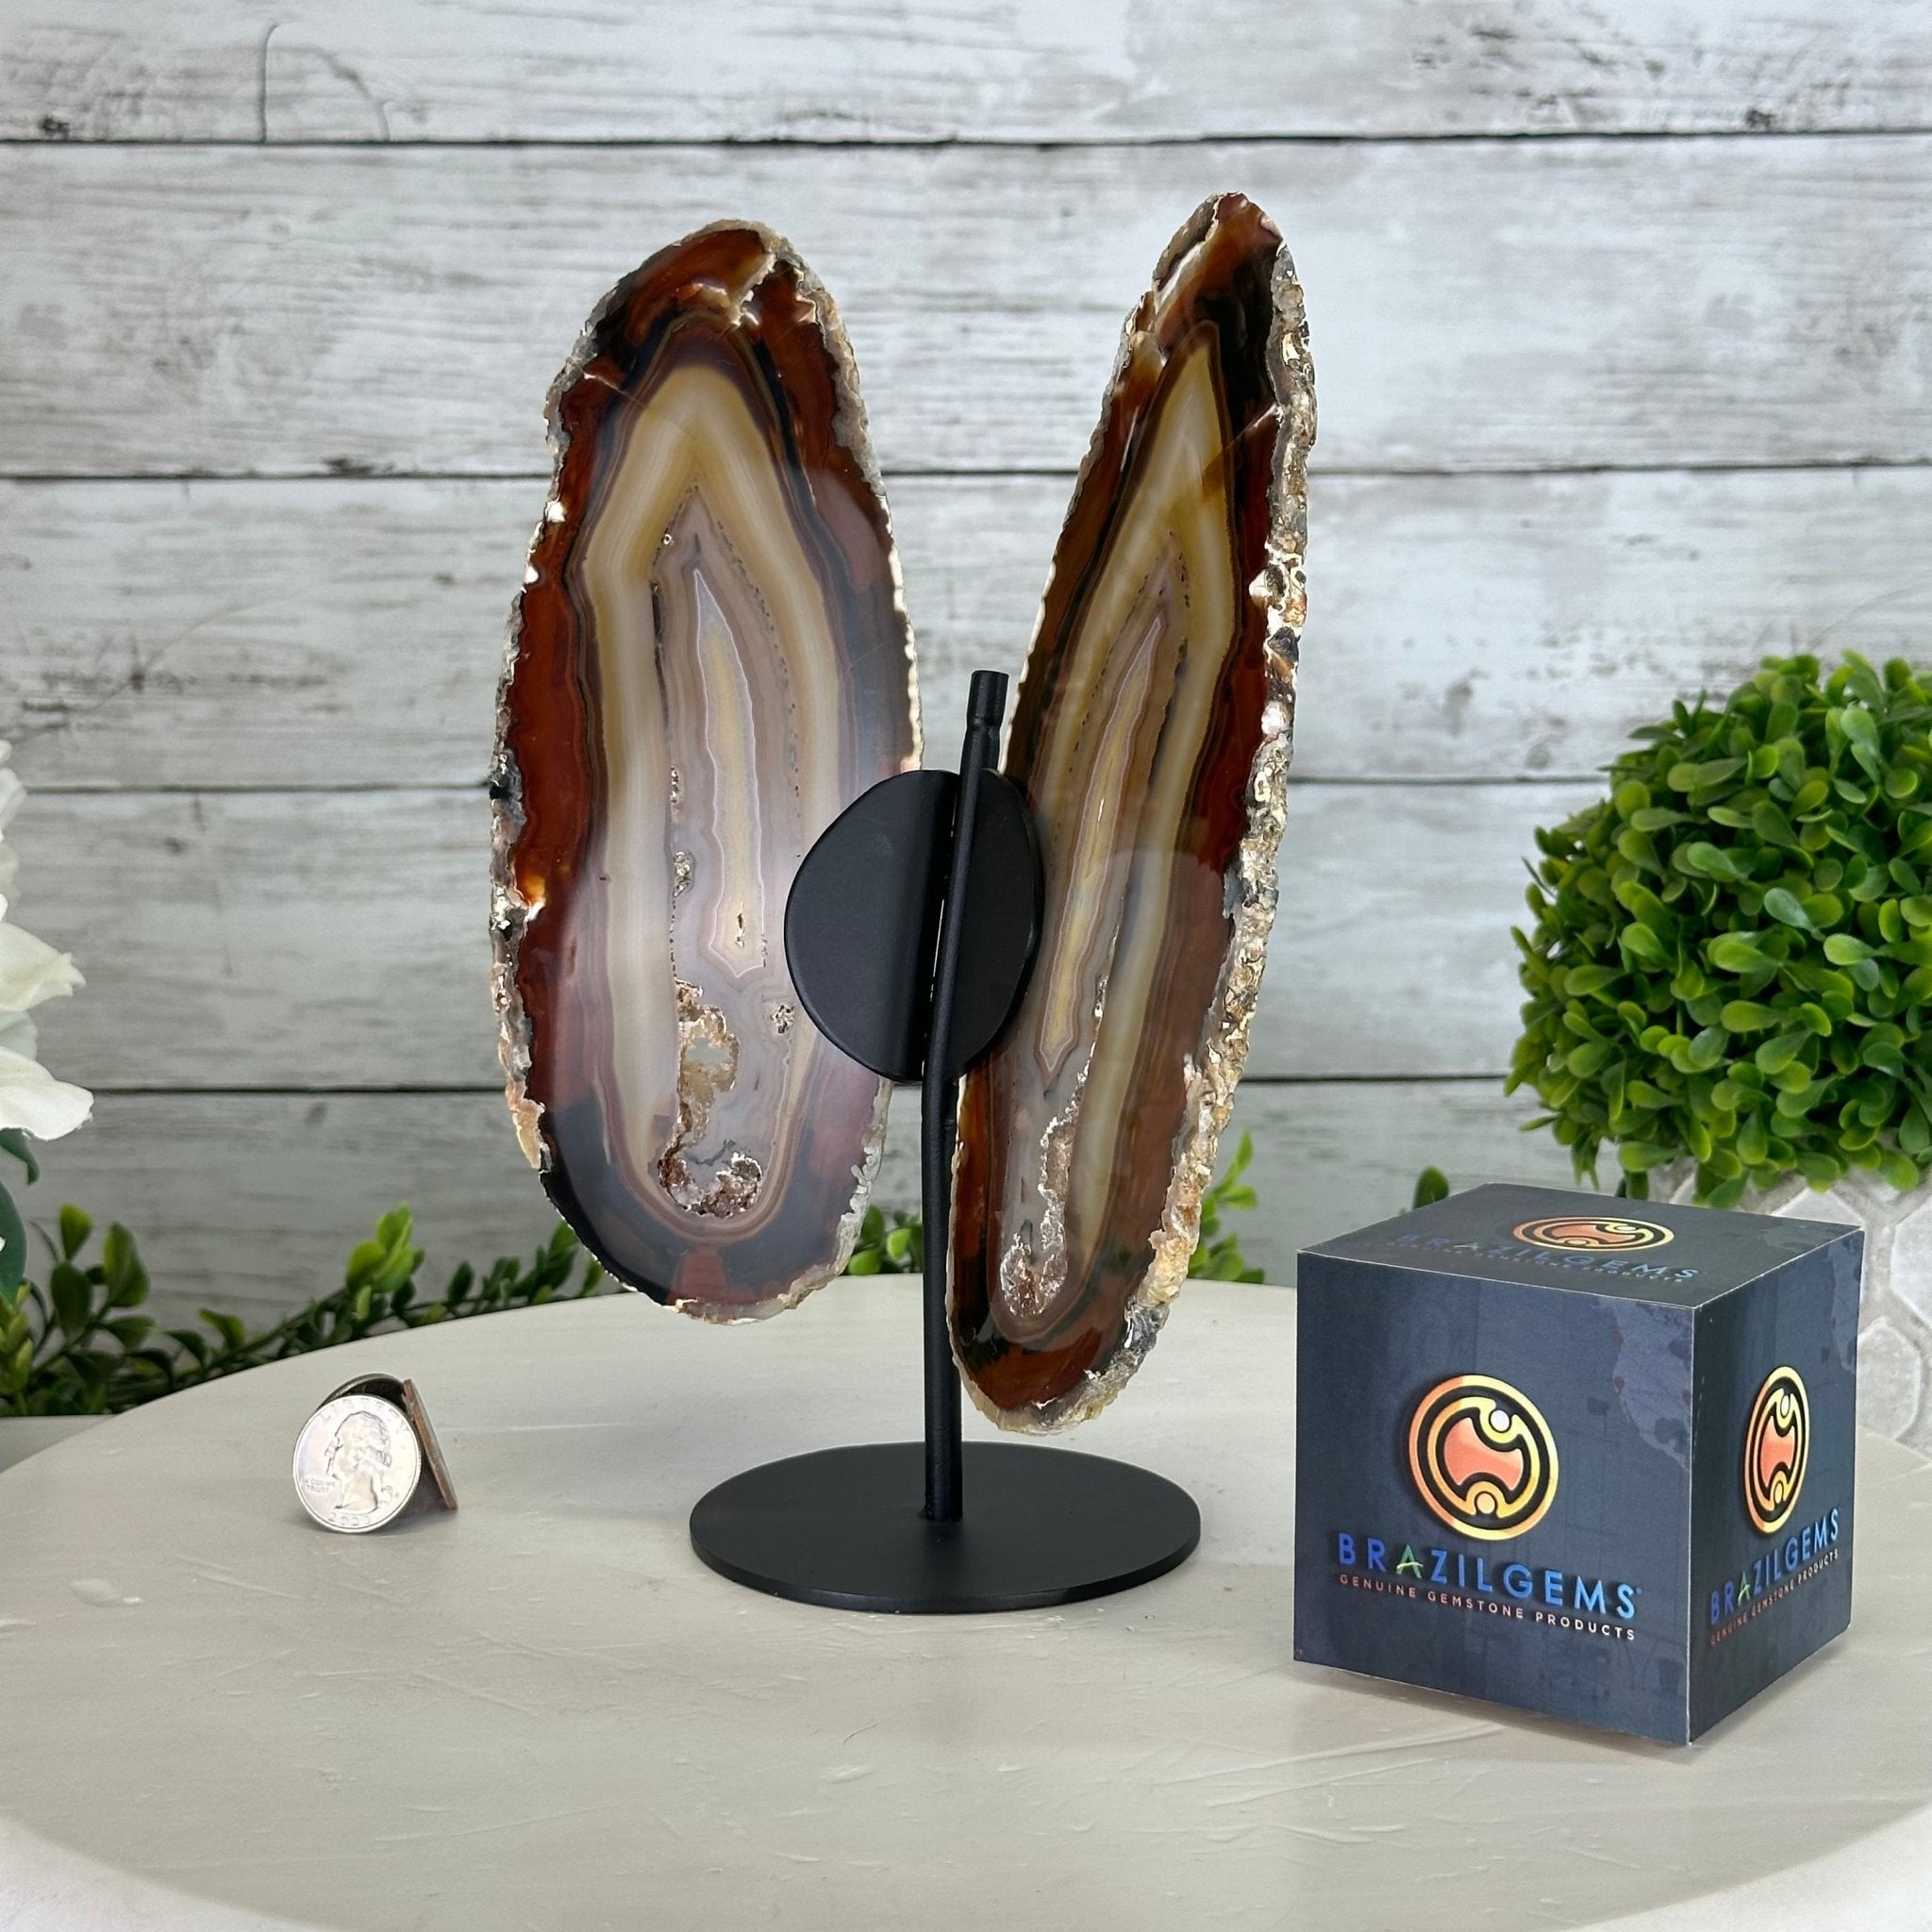 Natural Brazilian Agate "Butterfly Wings", 8.9" Tall #5050NA-147 - Brazil GemsBrazil GemsNatural Brazilian Agate "Butterfly Wings", 8.9" Tall #5050NA-147Agate Butterfly Wings5050NA-147